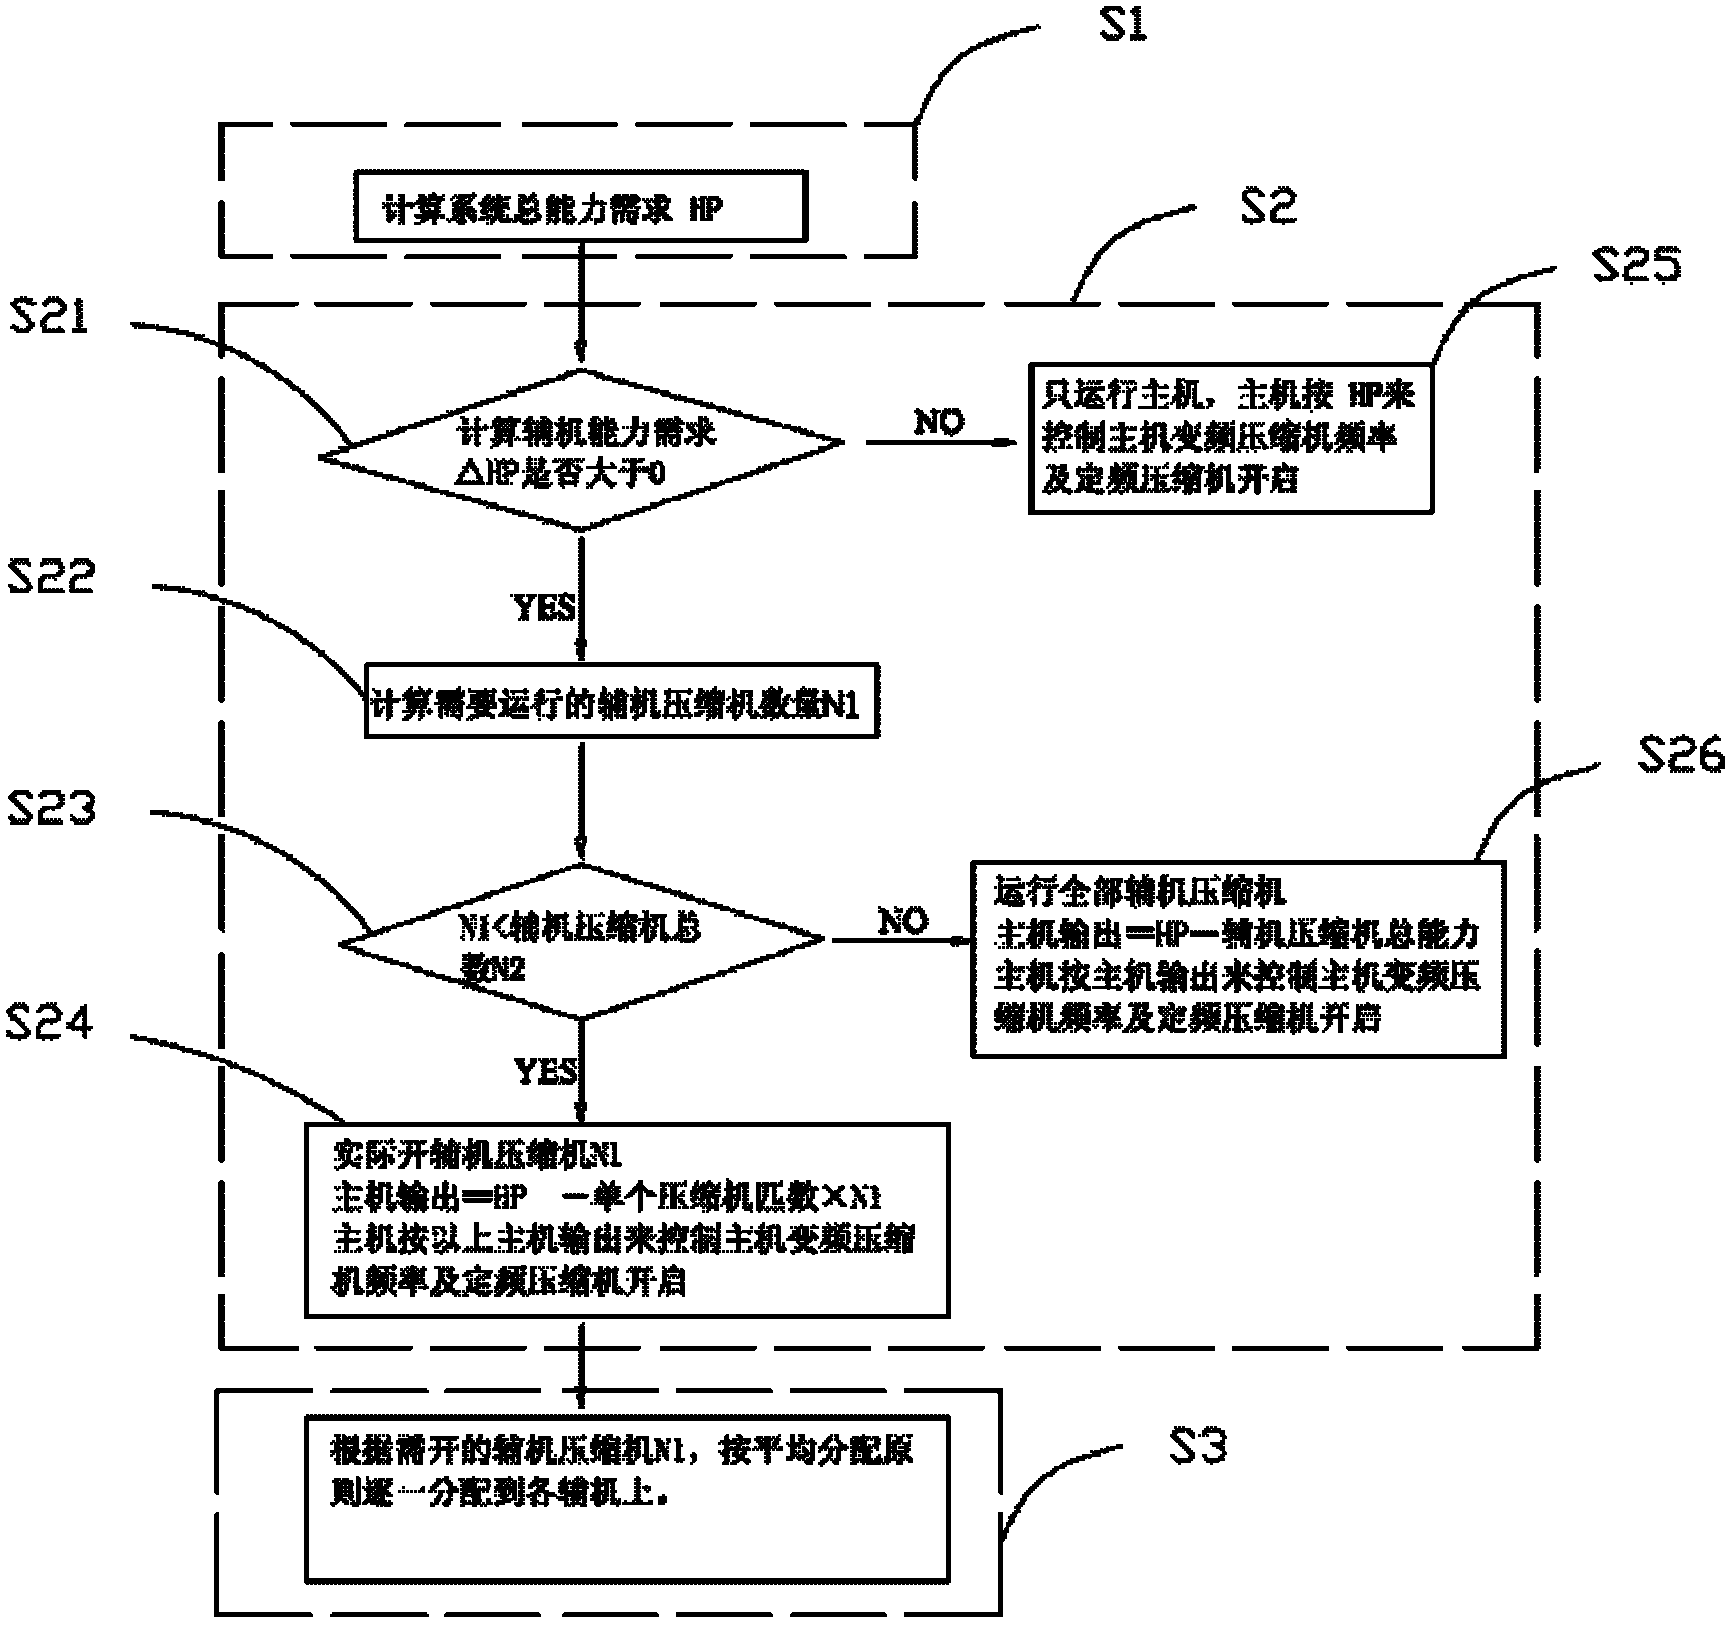 Modular multi-connection control method and system